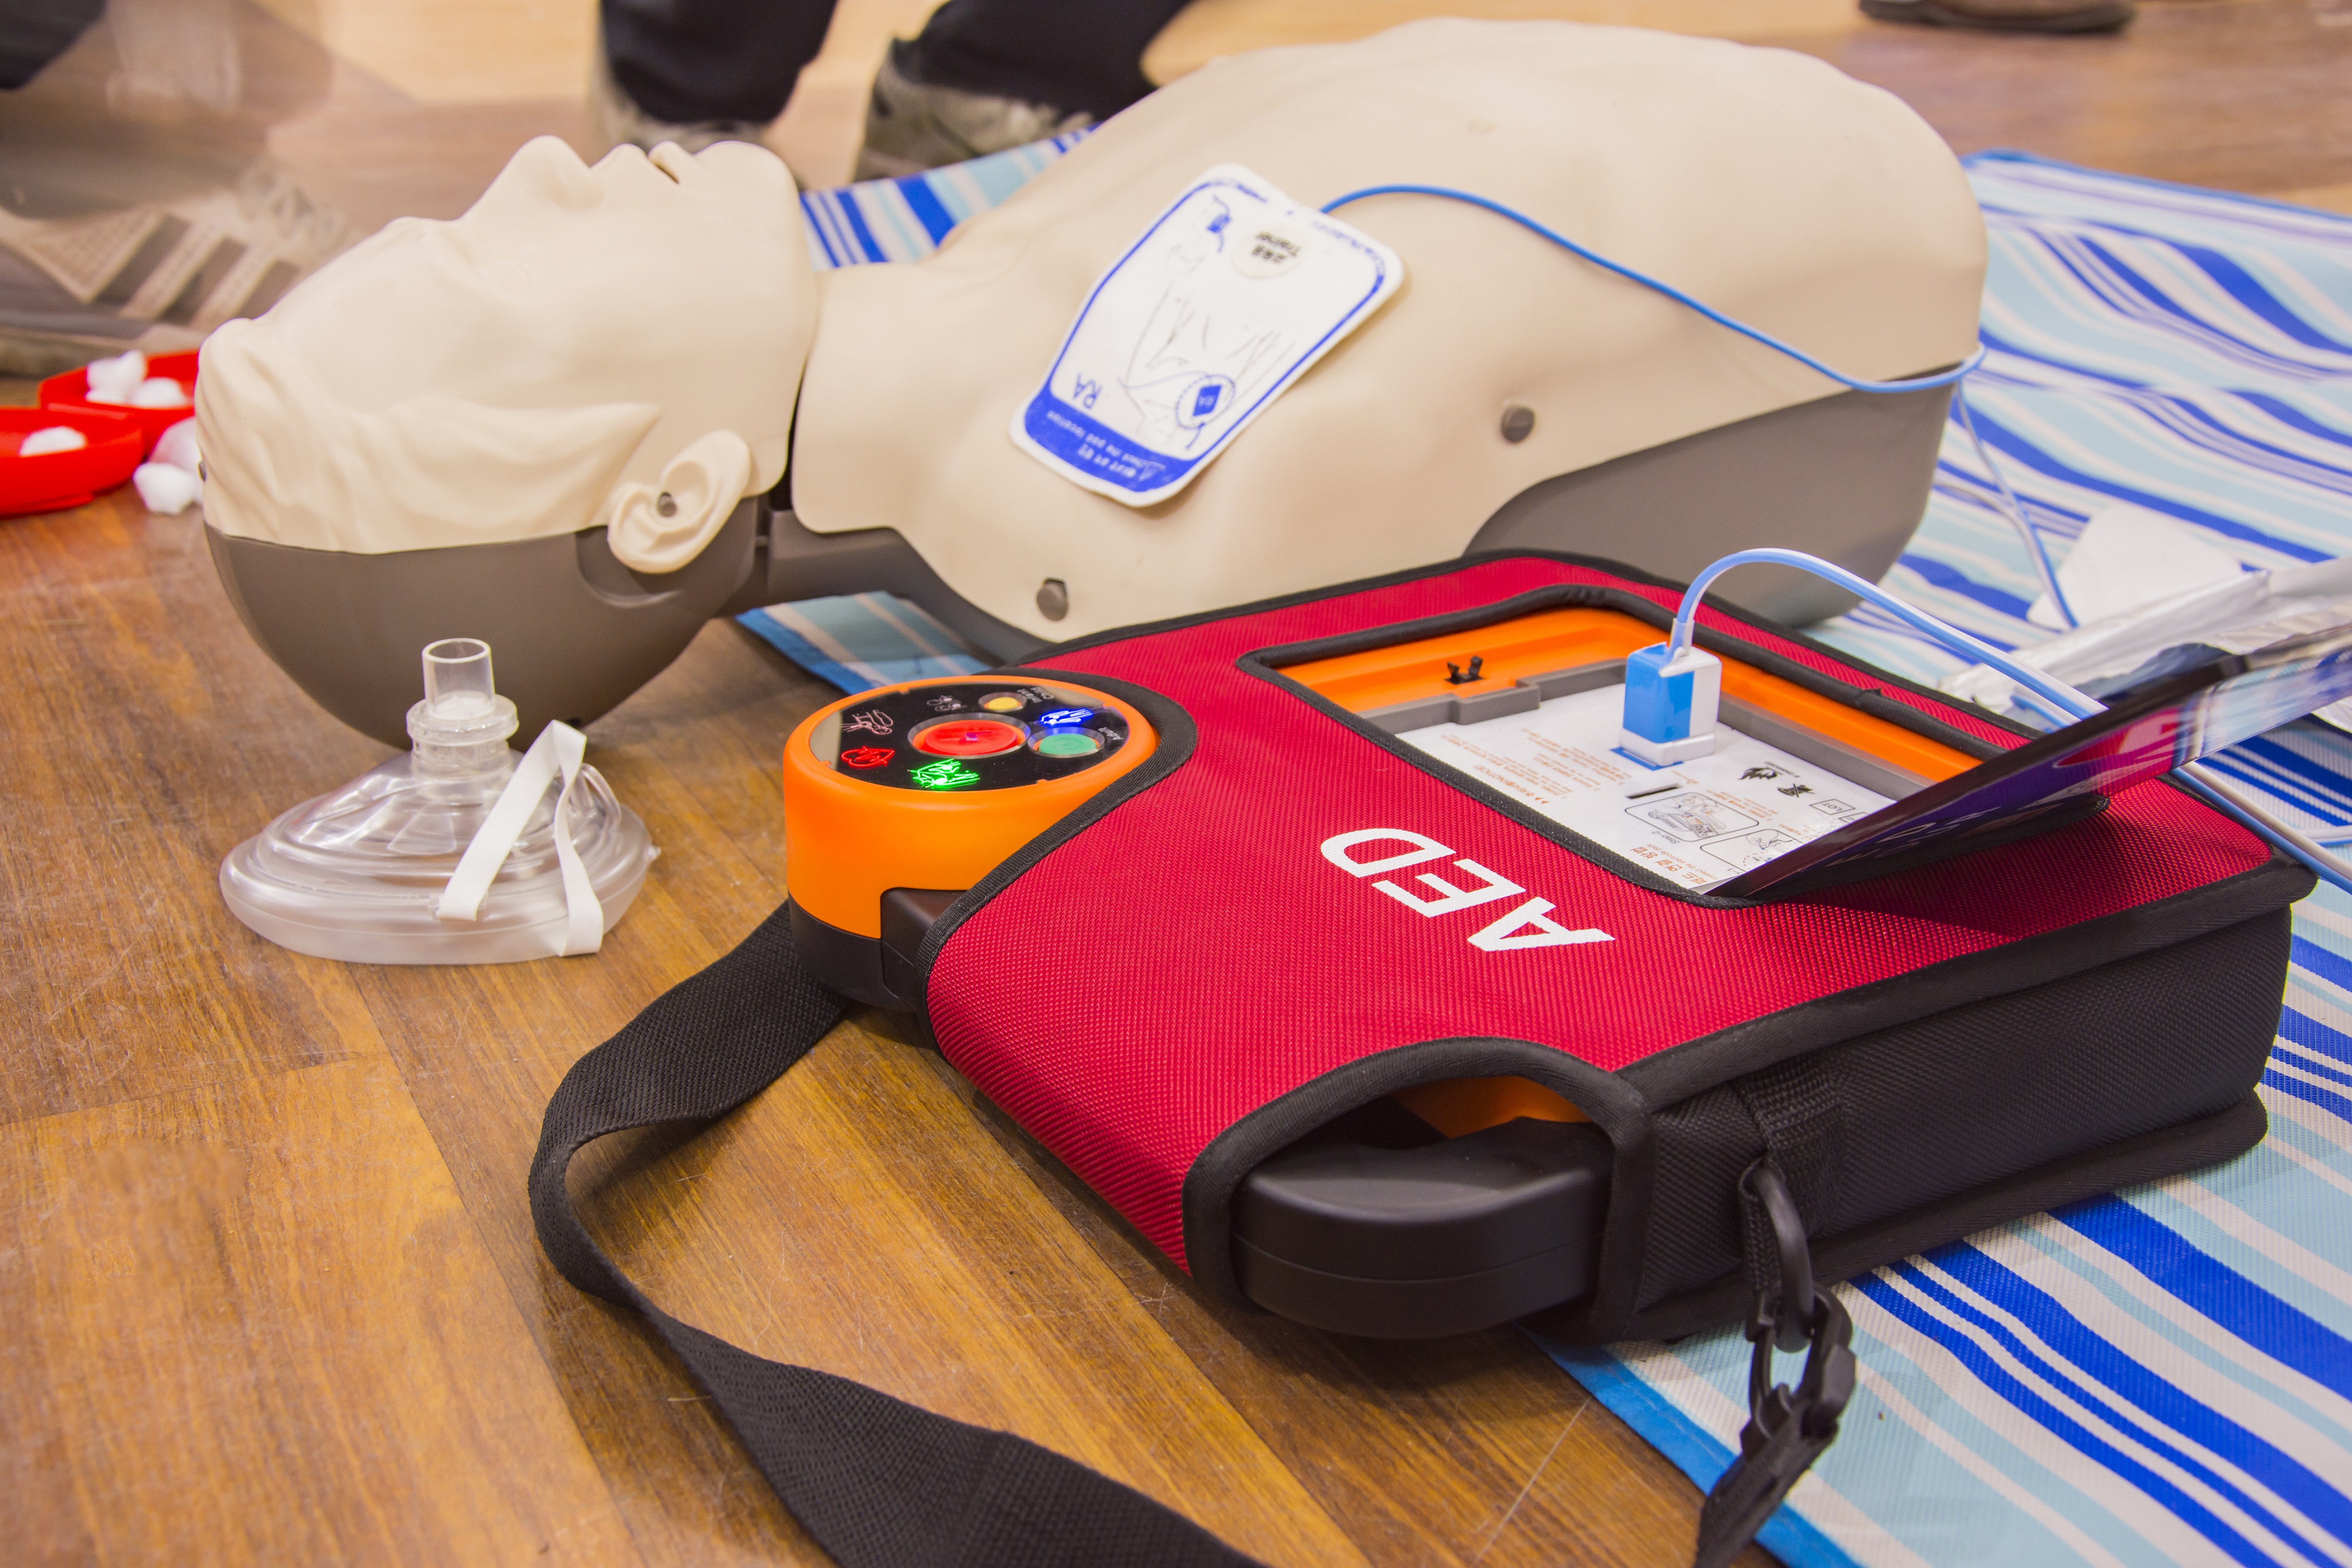 CPR AED First Aid Training Class February 26, 2022 in Tigard